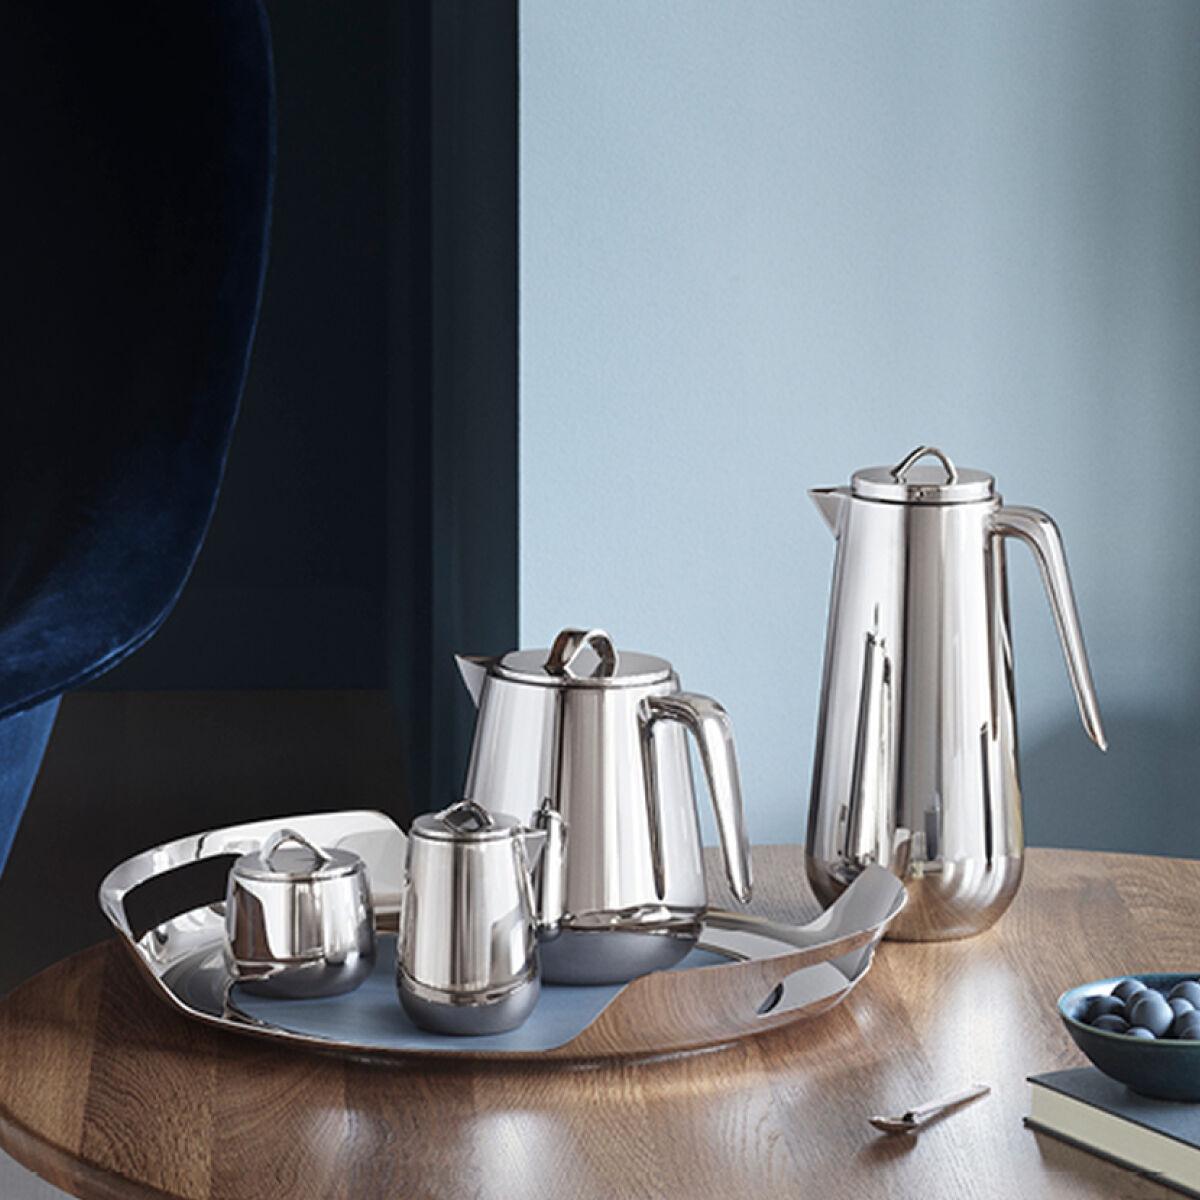 With its sculptural form and shiny surface, this beautiful multifunctional bowl makes a striking addition to any table top. Use it as a bonbonniere to hold sweet treats and candies or as a sugar bowl when tea time comes around. The Swedish duo